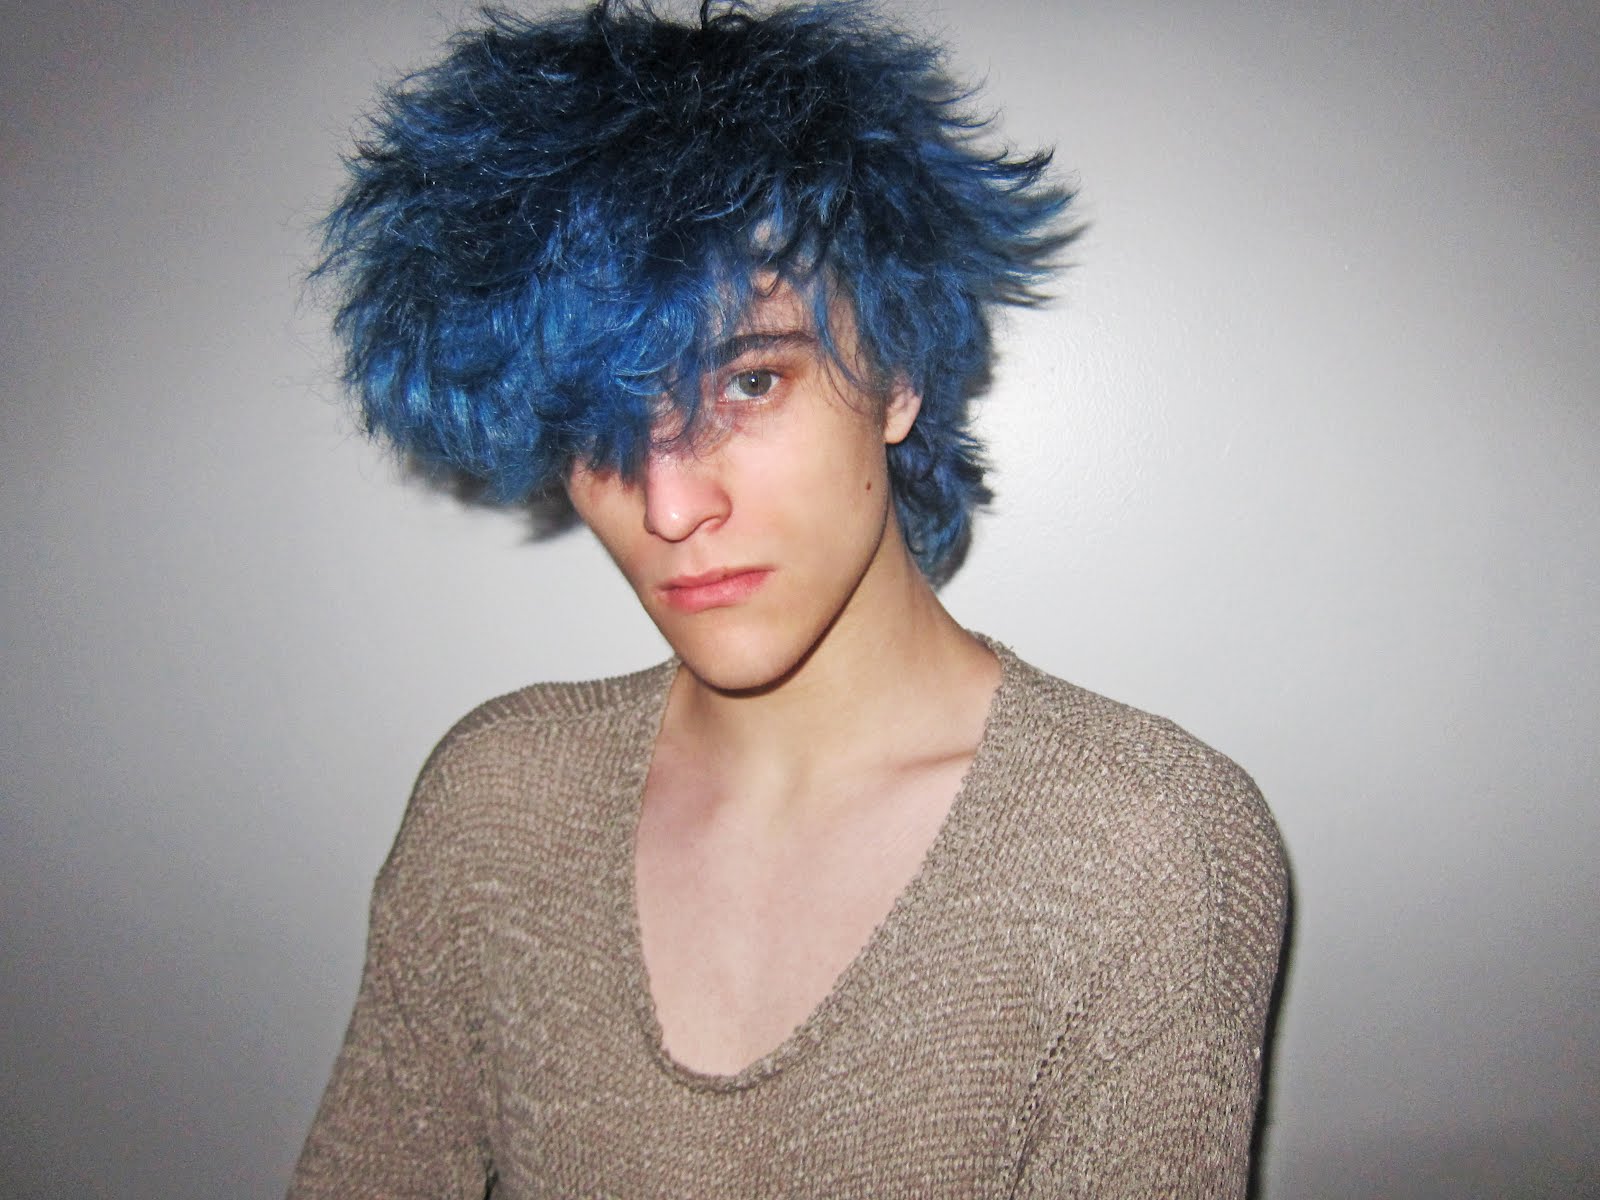 10. "Blue Hair: The Ultimate Guide for Men" - wide 11